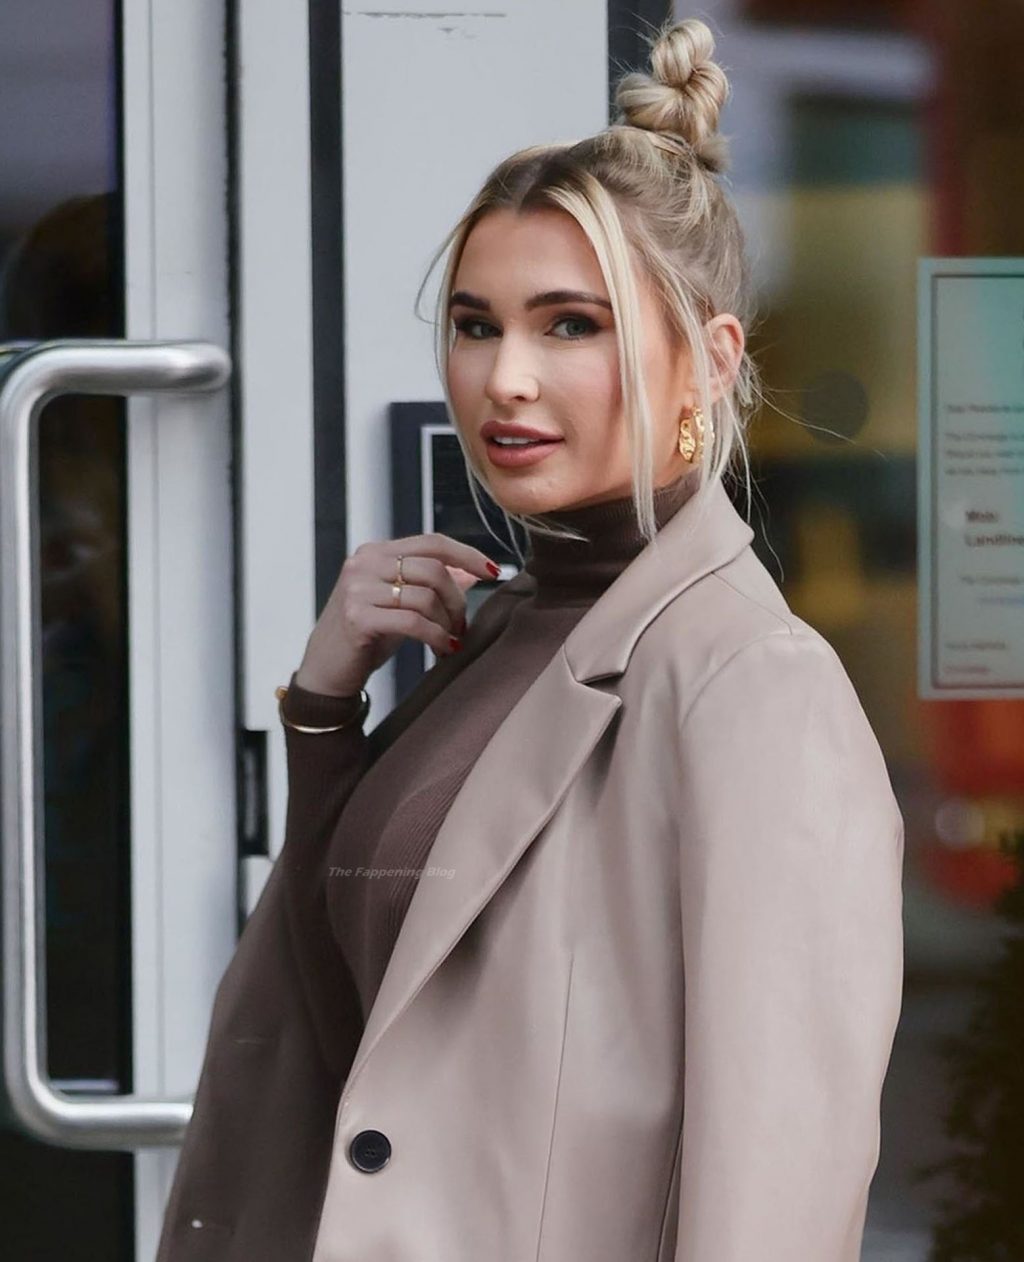 Billie Faiers Looks Chic and Stylish in London (11 Photos)